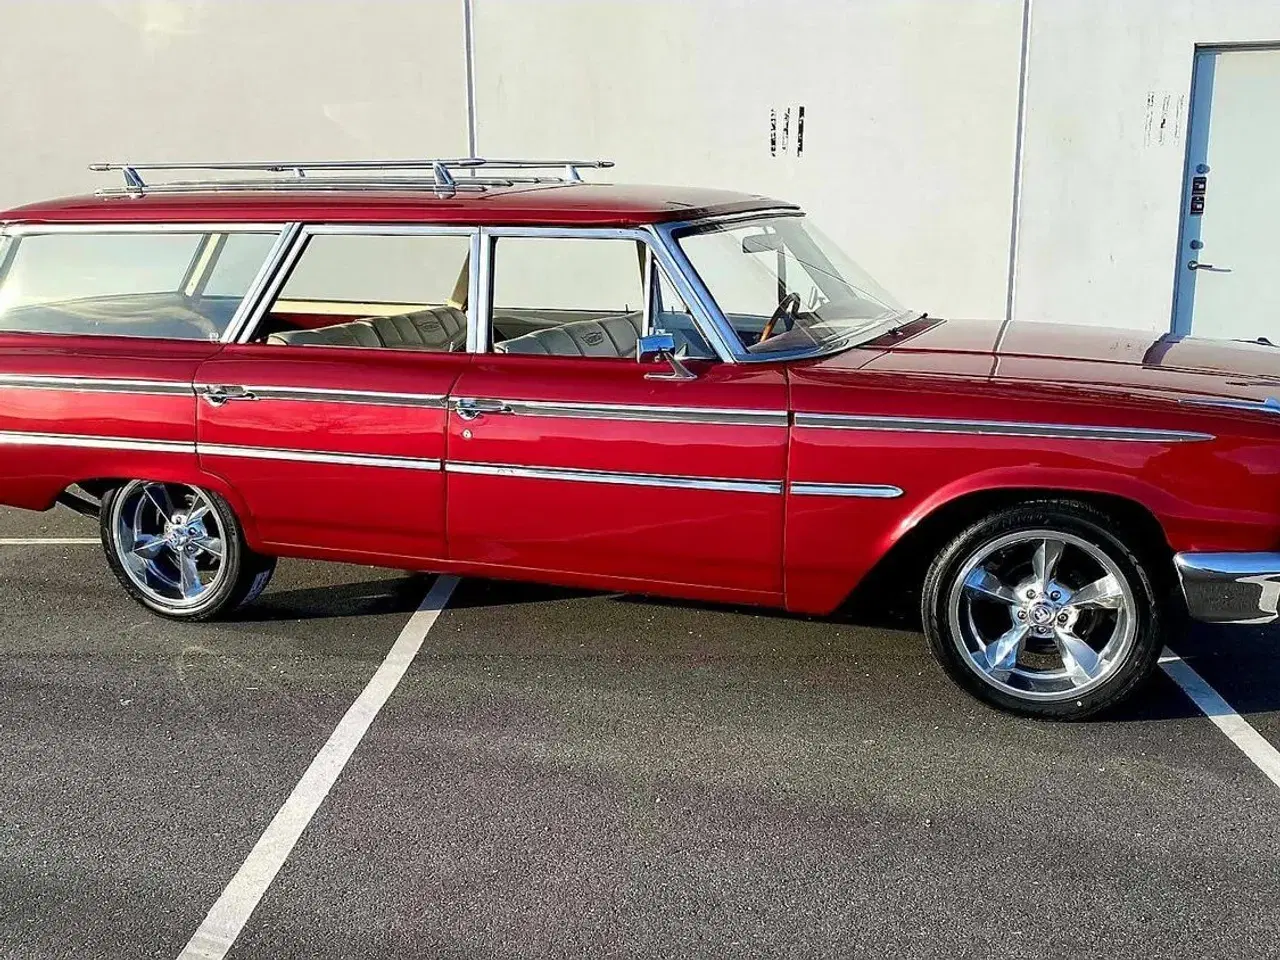 Billede 5 - 1963 Ford Galaxie Country Wagon